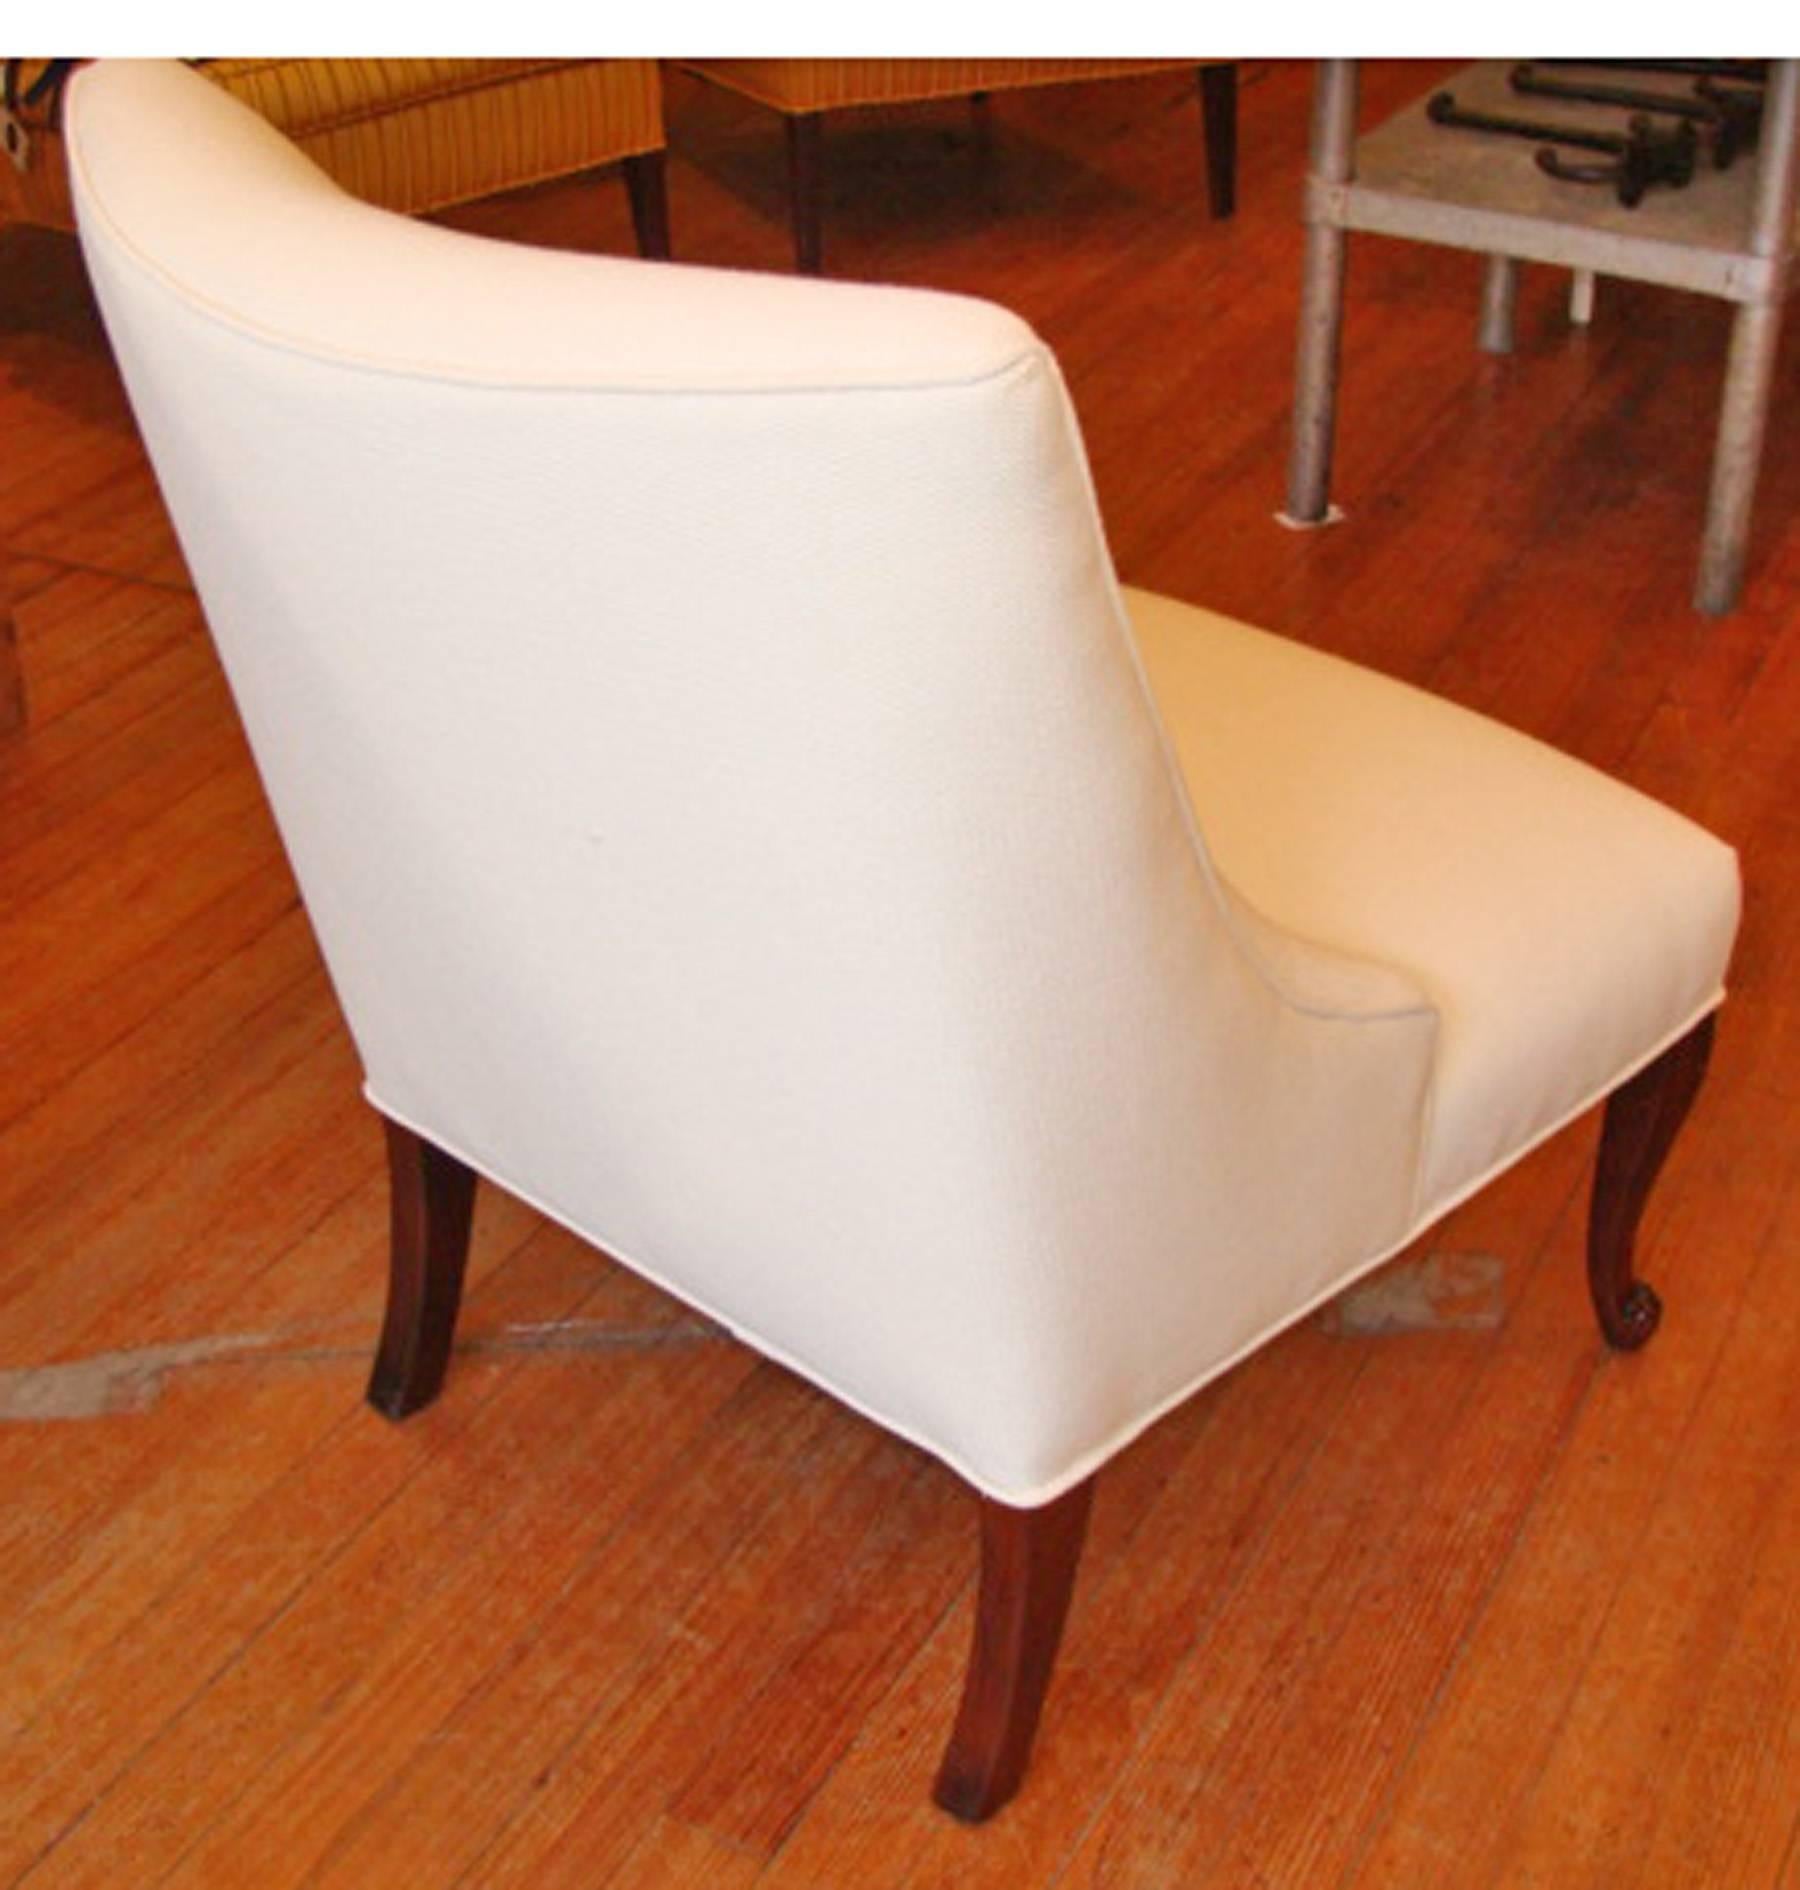 Midcentury slipper chairs. Nice transitional form, from Regency to modern. Newly upholstered.